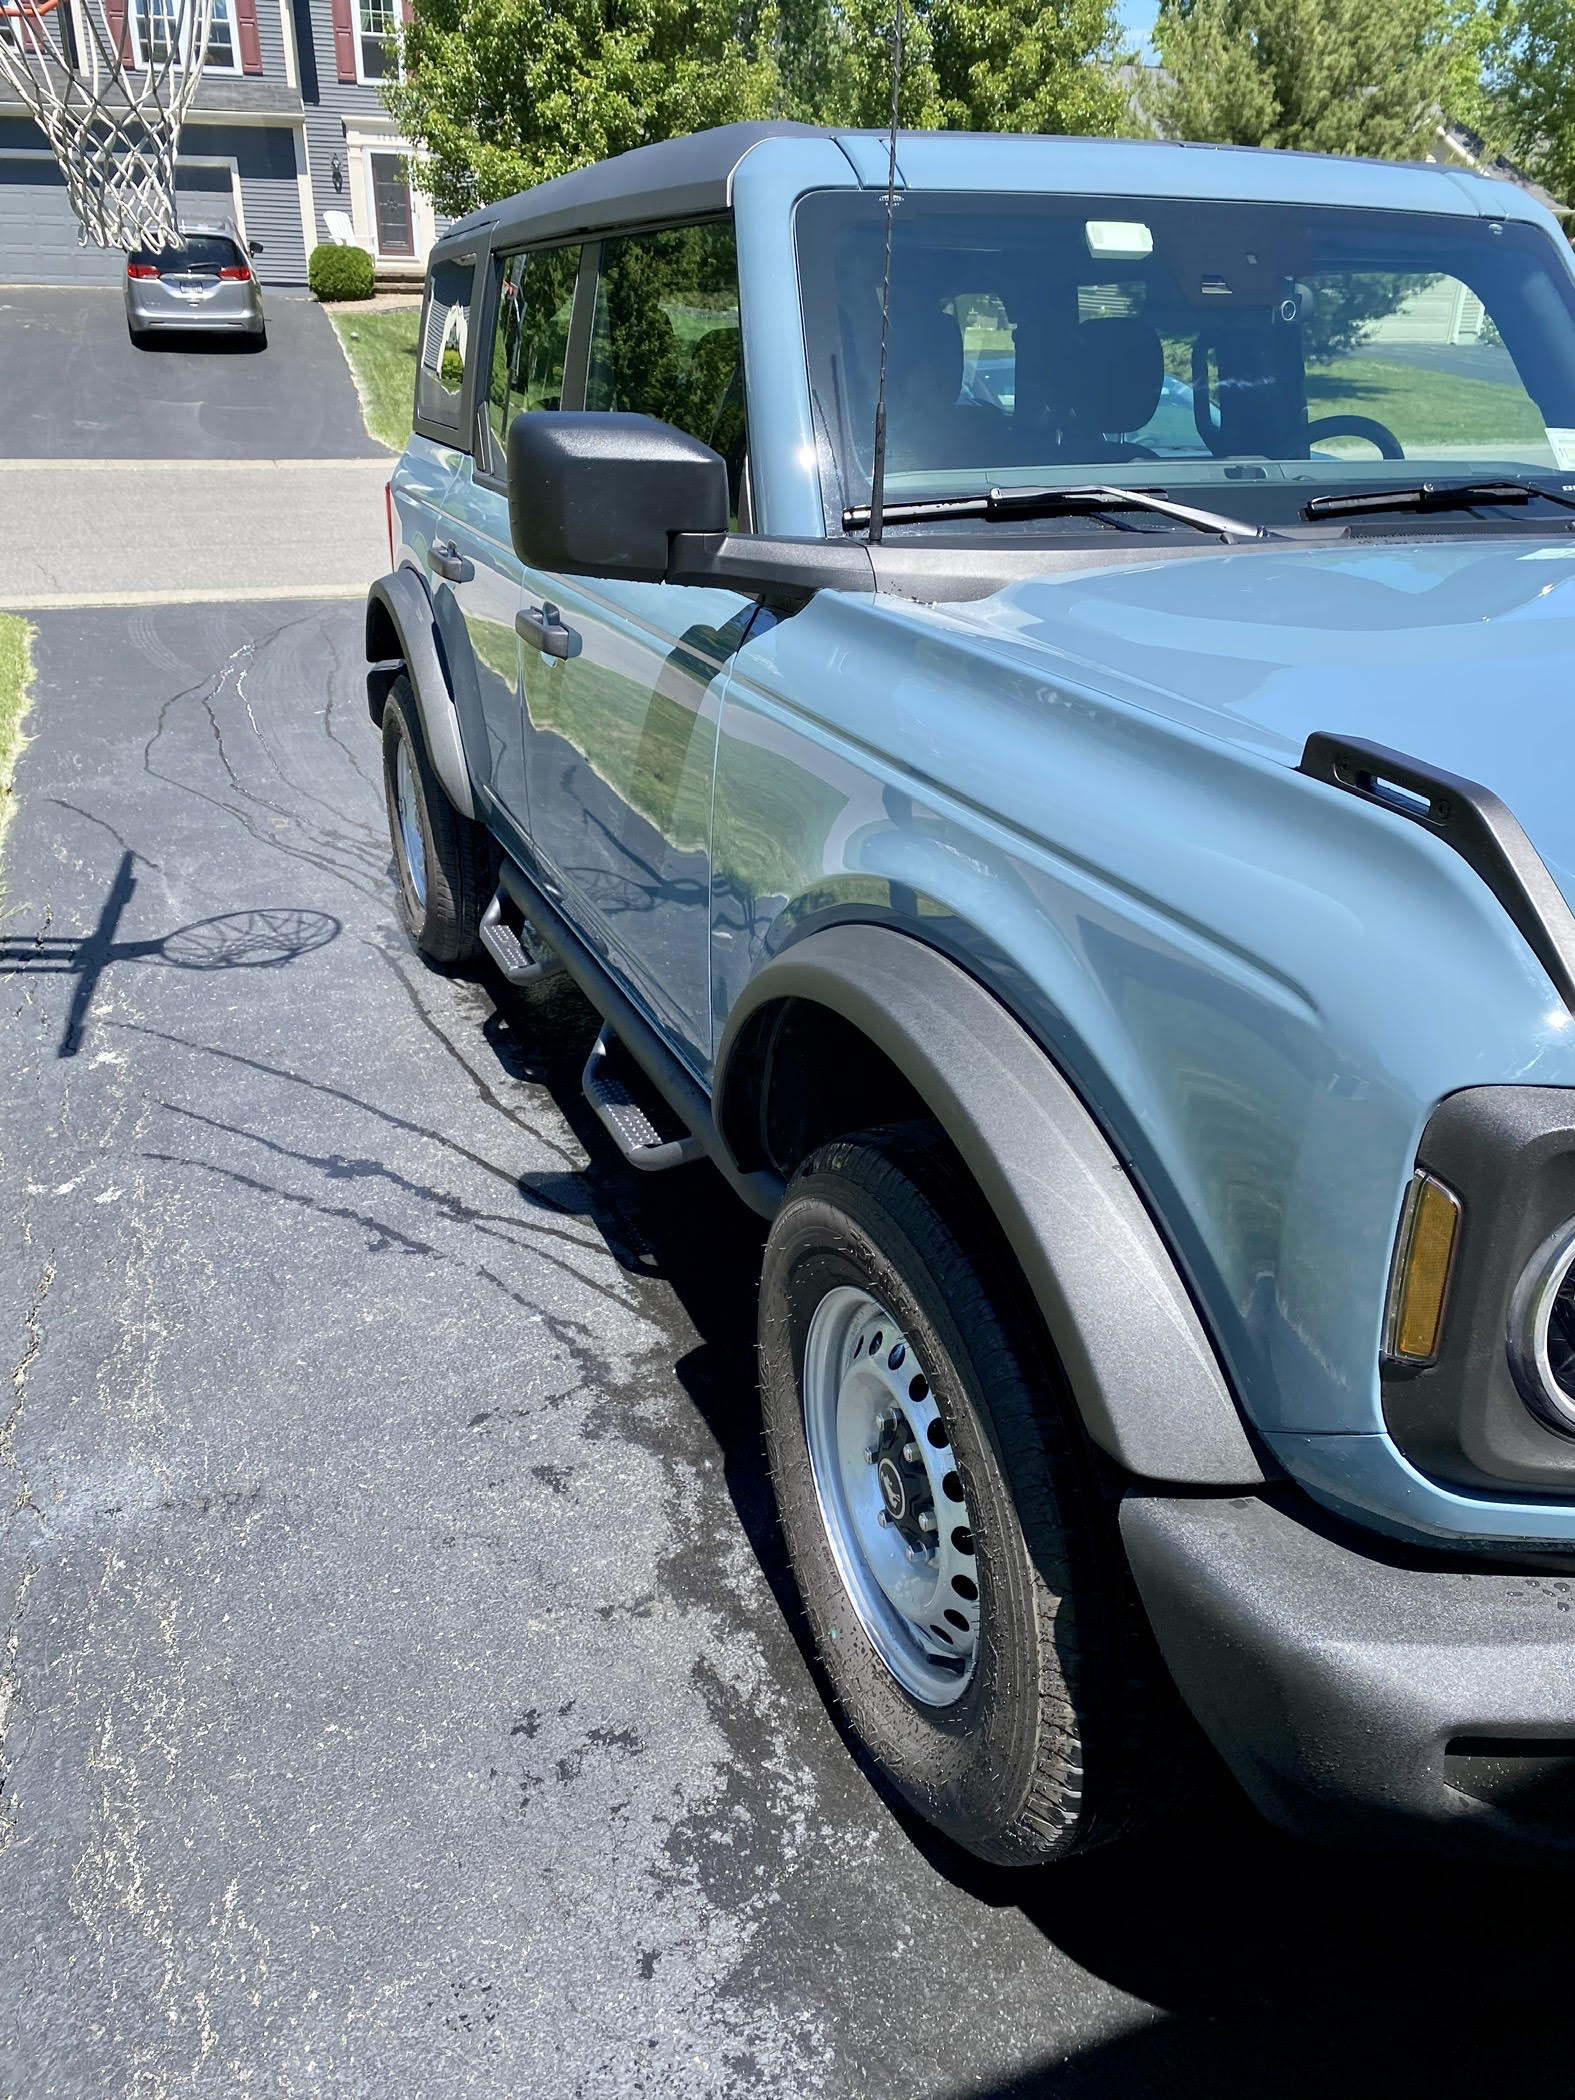 Ford Bronco Fender Flare Cleaning and Protection (How-To) -- Dawn Dish Soap, Sponge, Adam's Polishes Ceramic Graphene Coating side